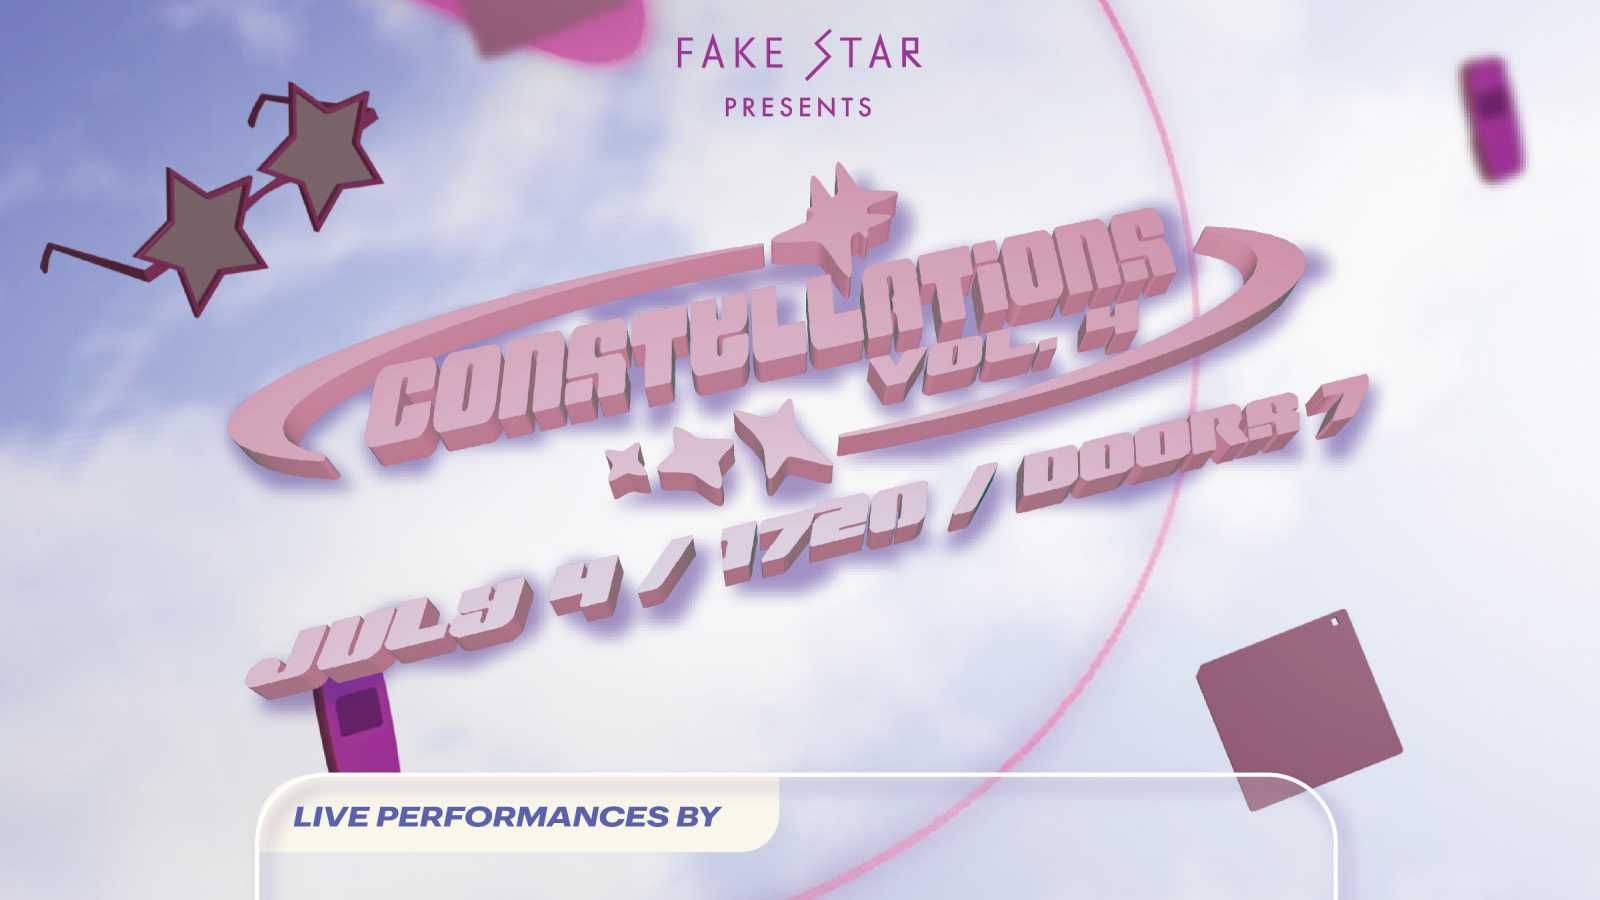 FAKE STAR USA Showcase Series "Constellations" to Return to Los Angeles © FAKE STAR USA. All rights reserved.